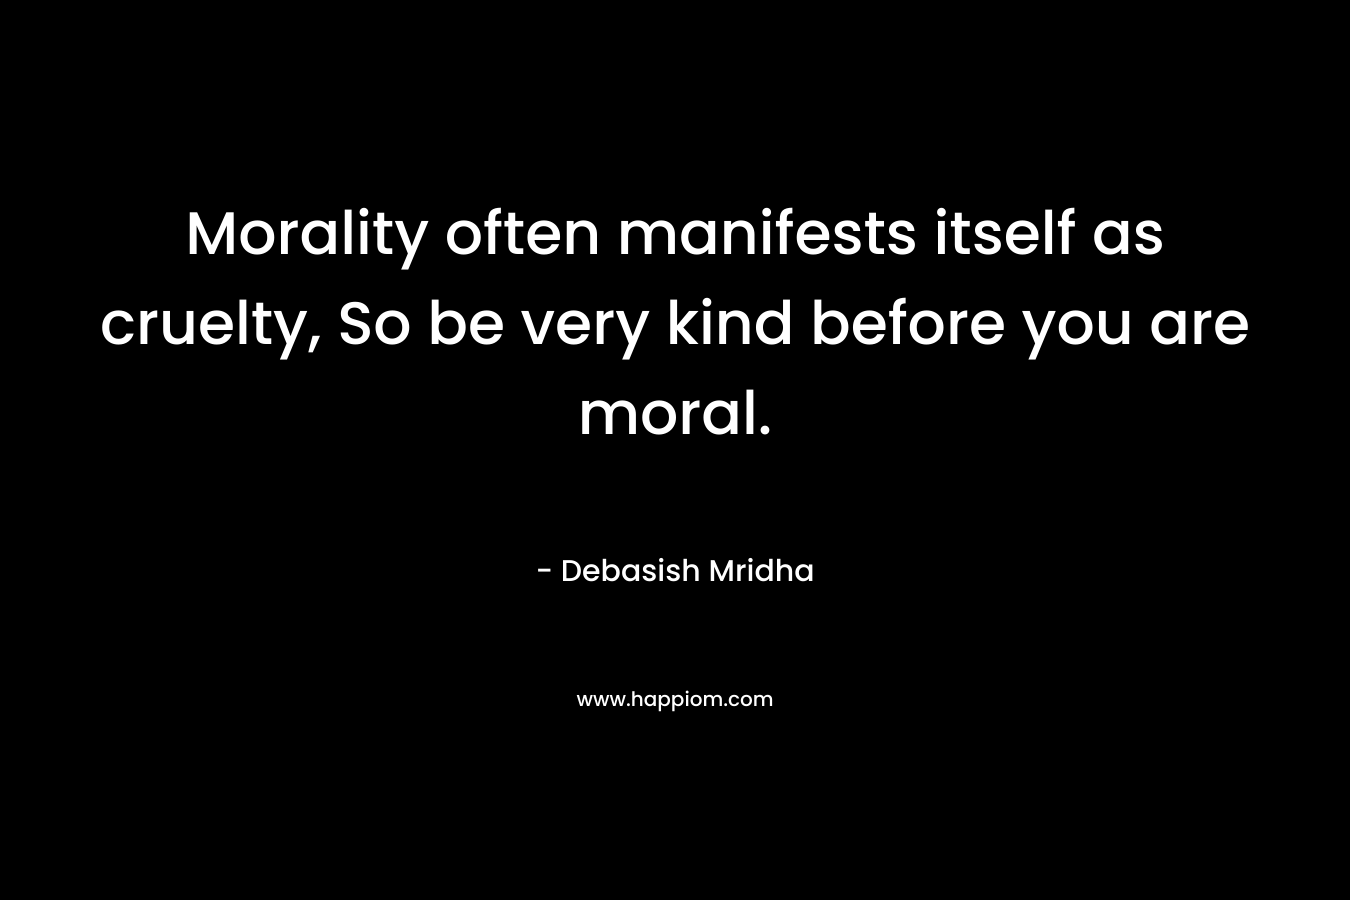 Morality often manifests itself as cruelty, So be very kind before you are moral.